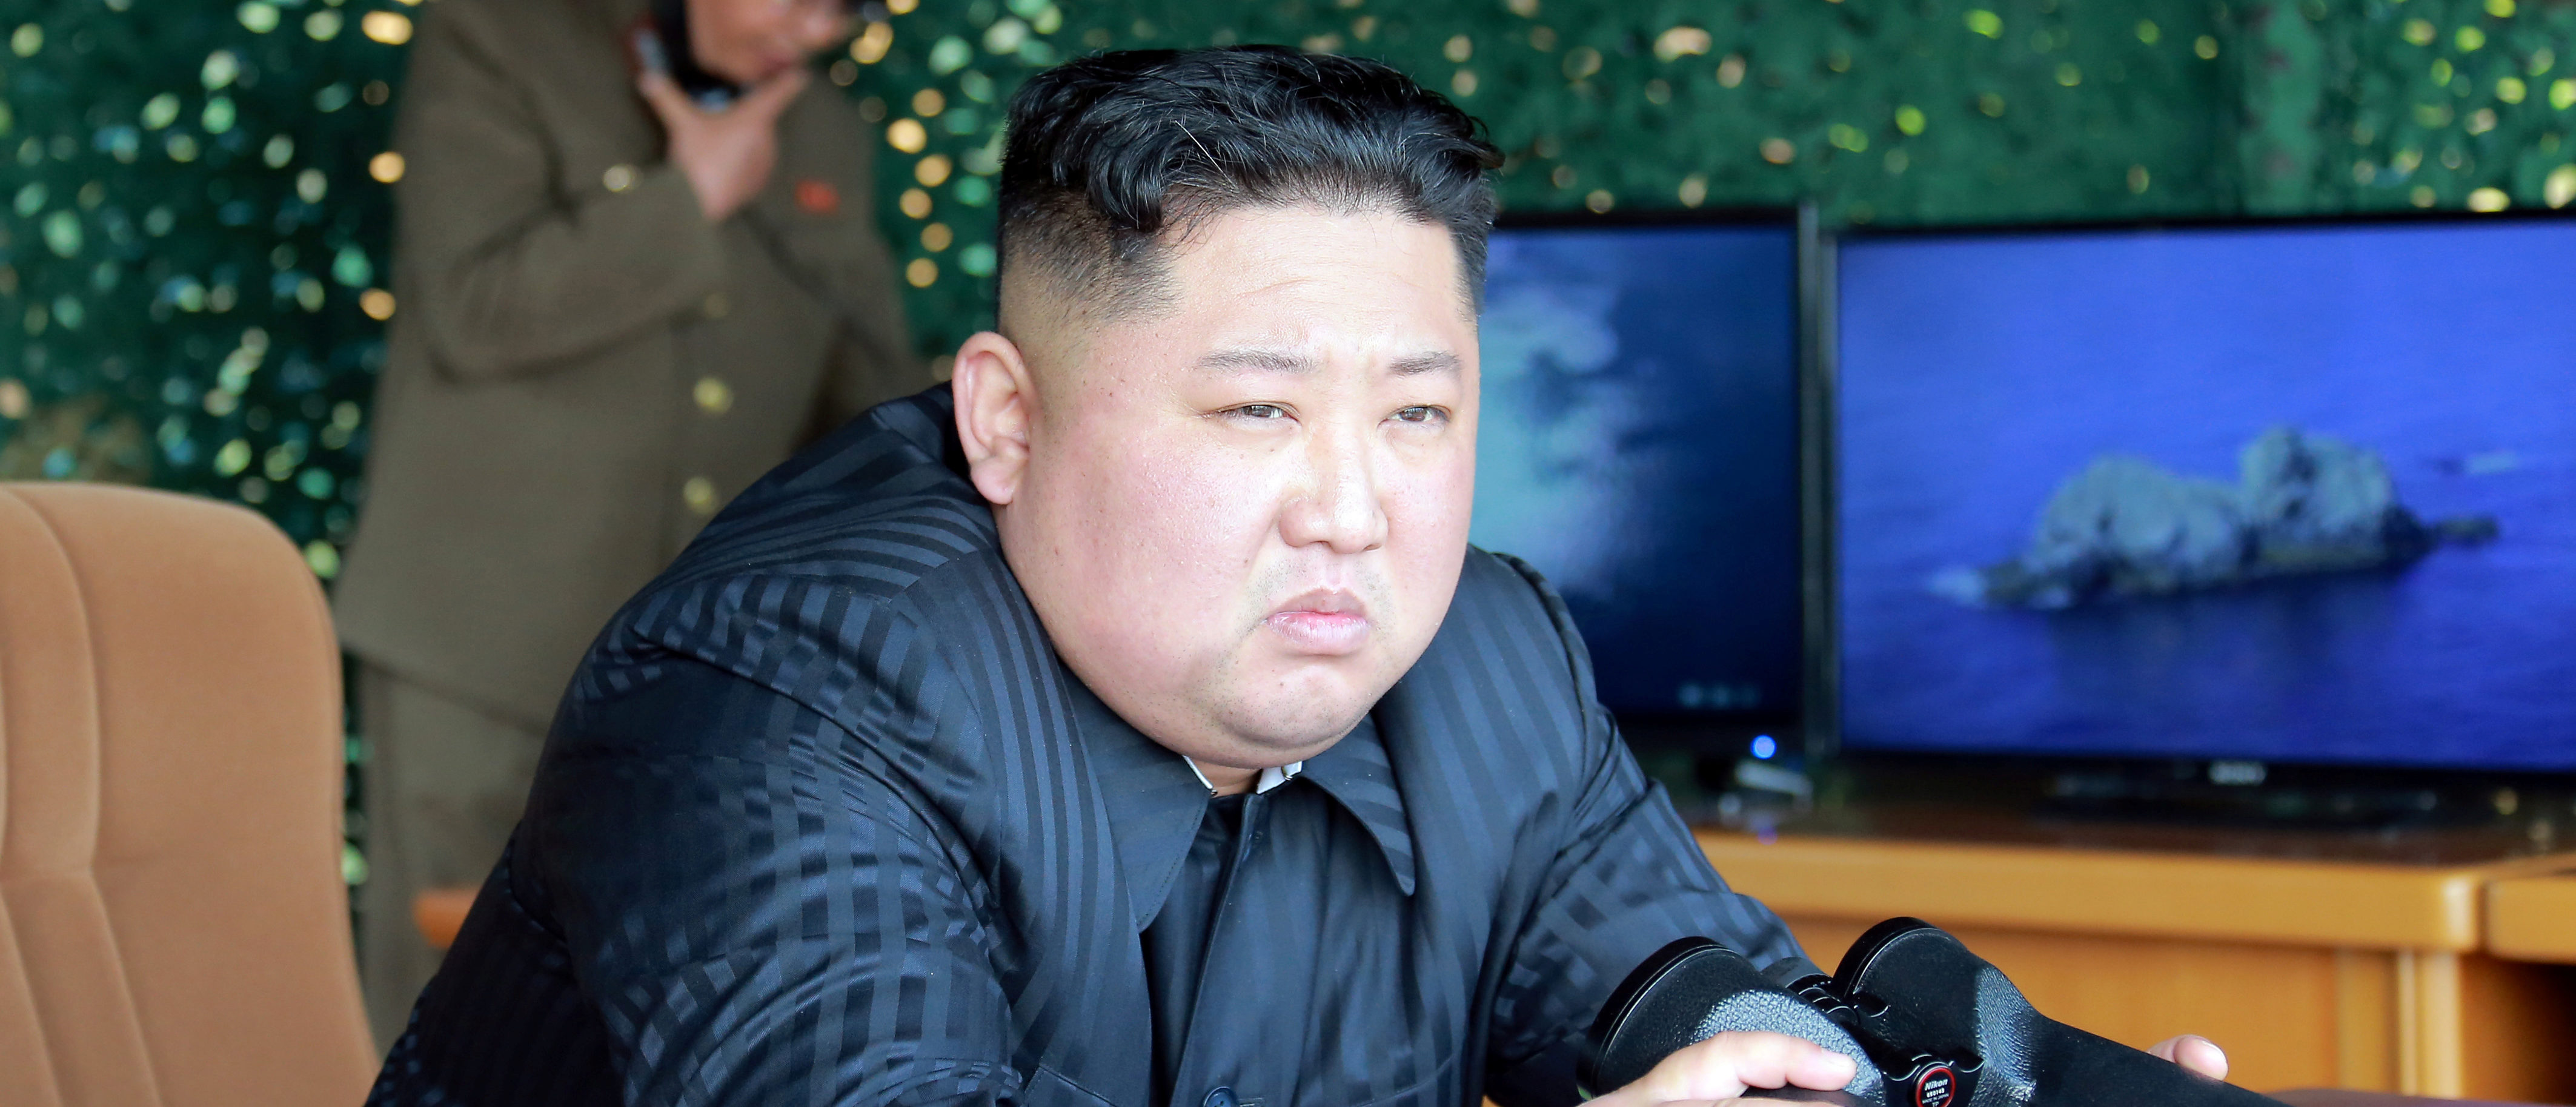 North Korea Threatens Us After State Department Exposes Sex Trafficking Details The Daily Caller 